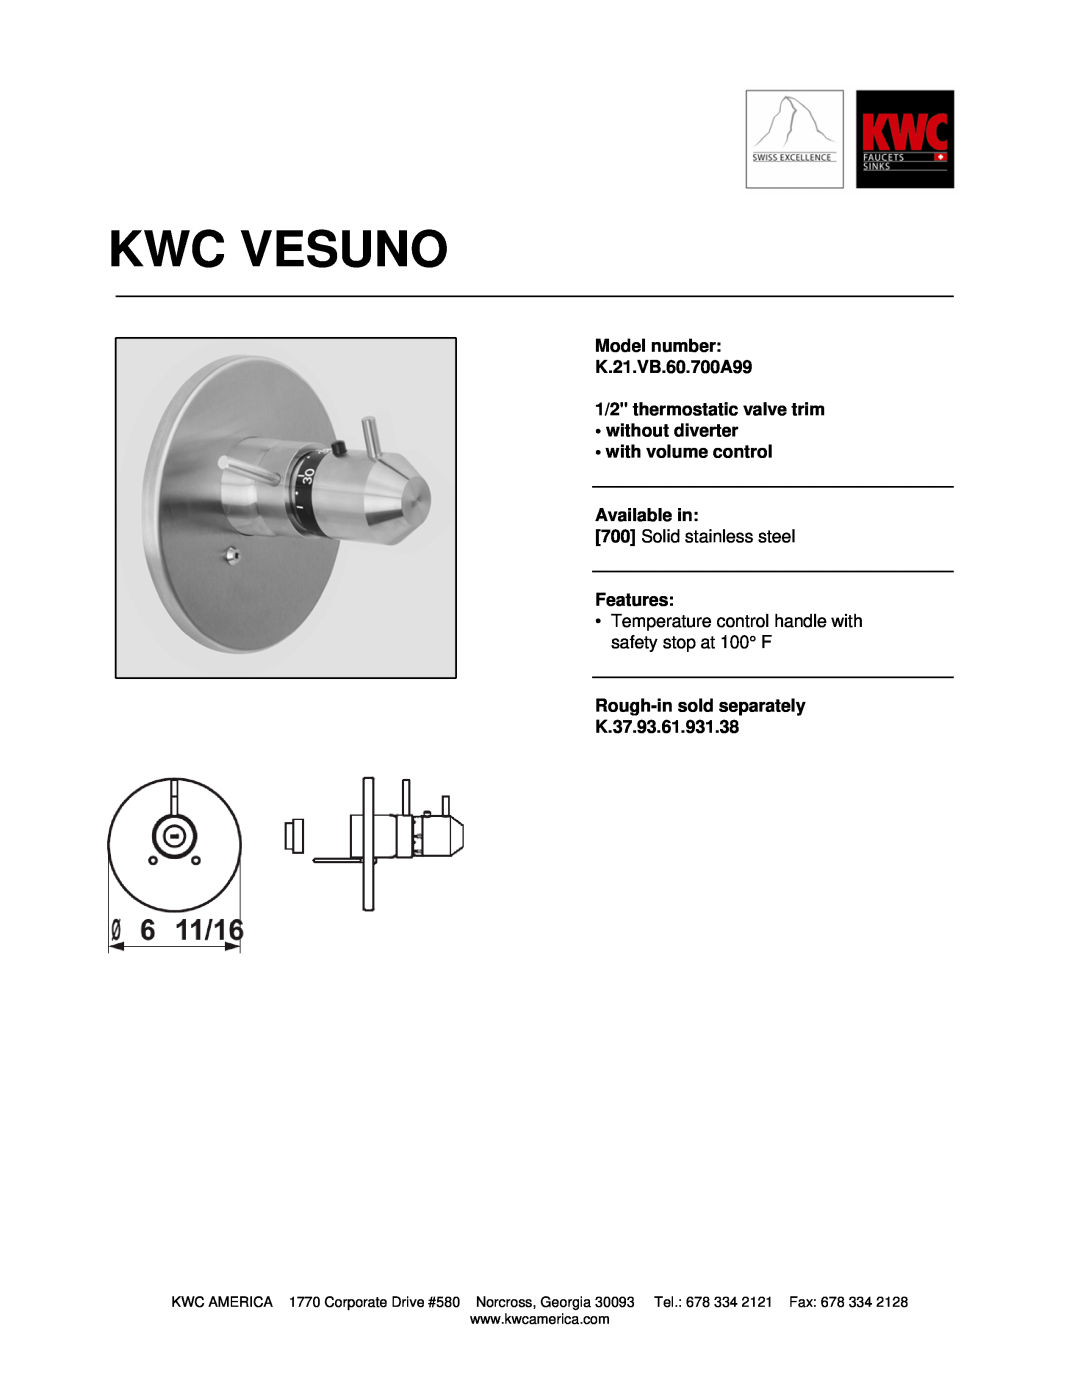 KWC manual Kwc Vesuno, Model number K.21.VB.60.700A99, 1/2 thermostatic valve trim without diverter, Features 